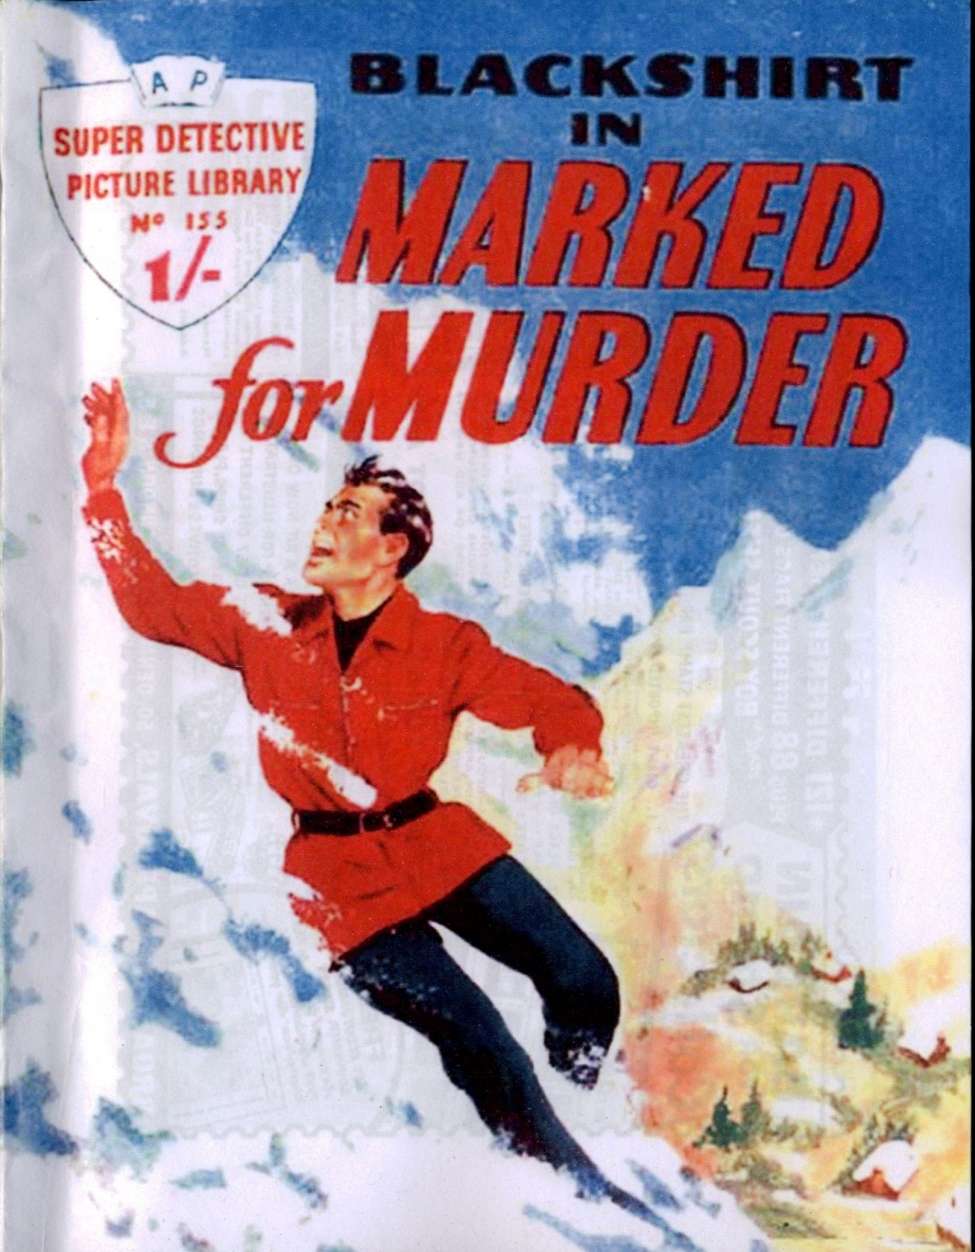 Comic Book Cover For Super Detective Library 155 - Marked for Murder